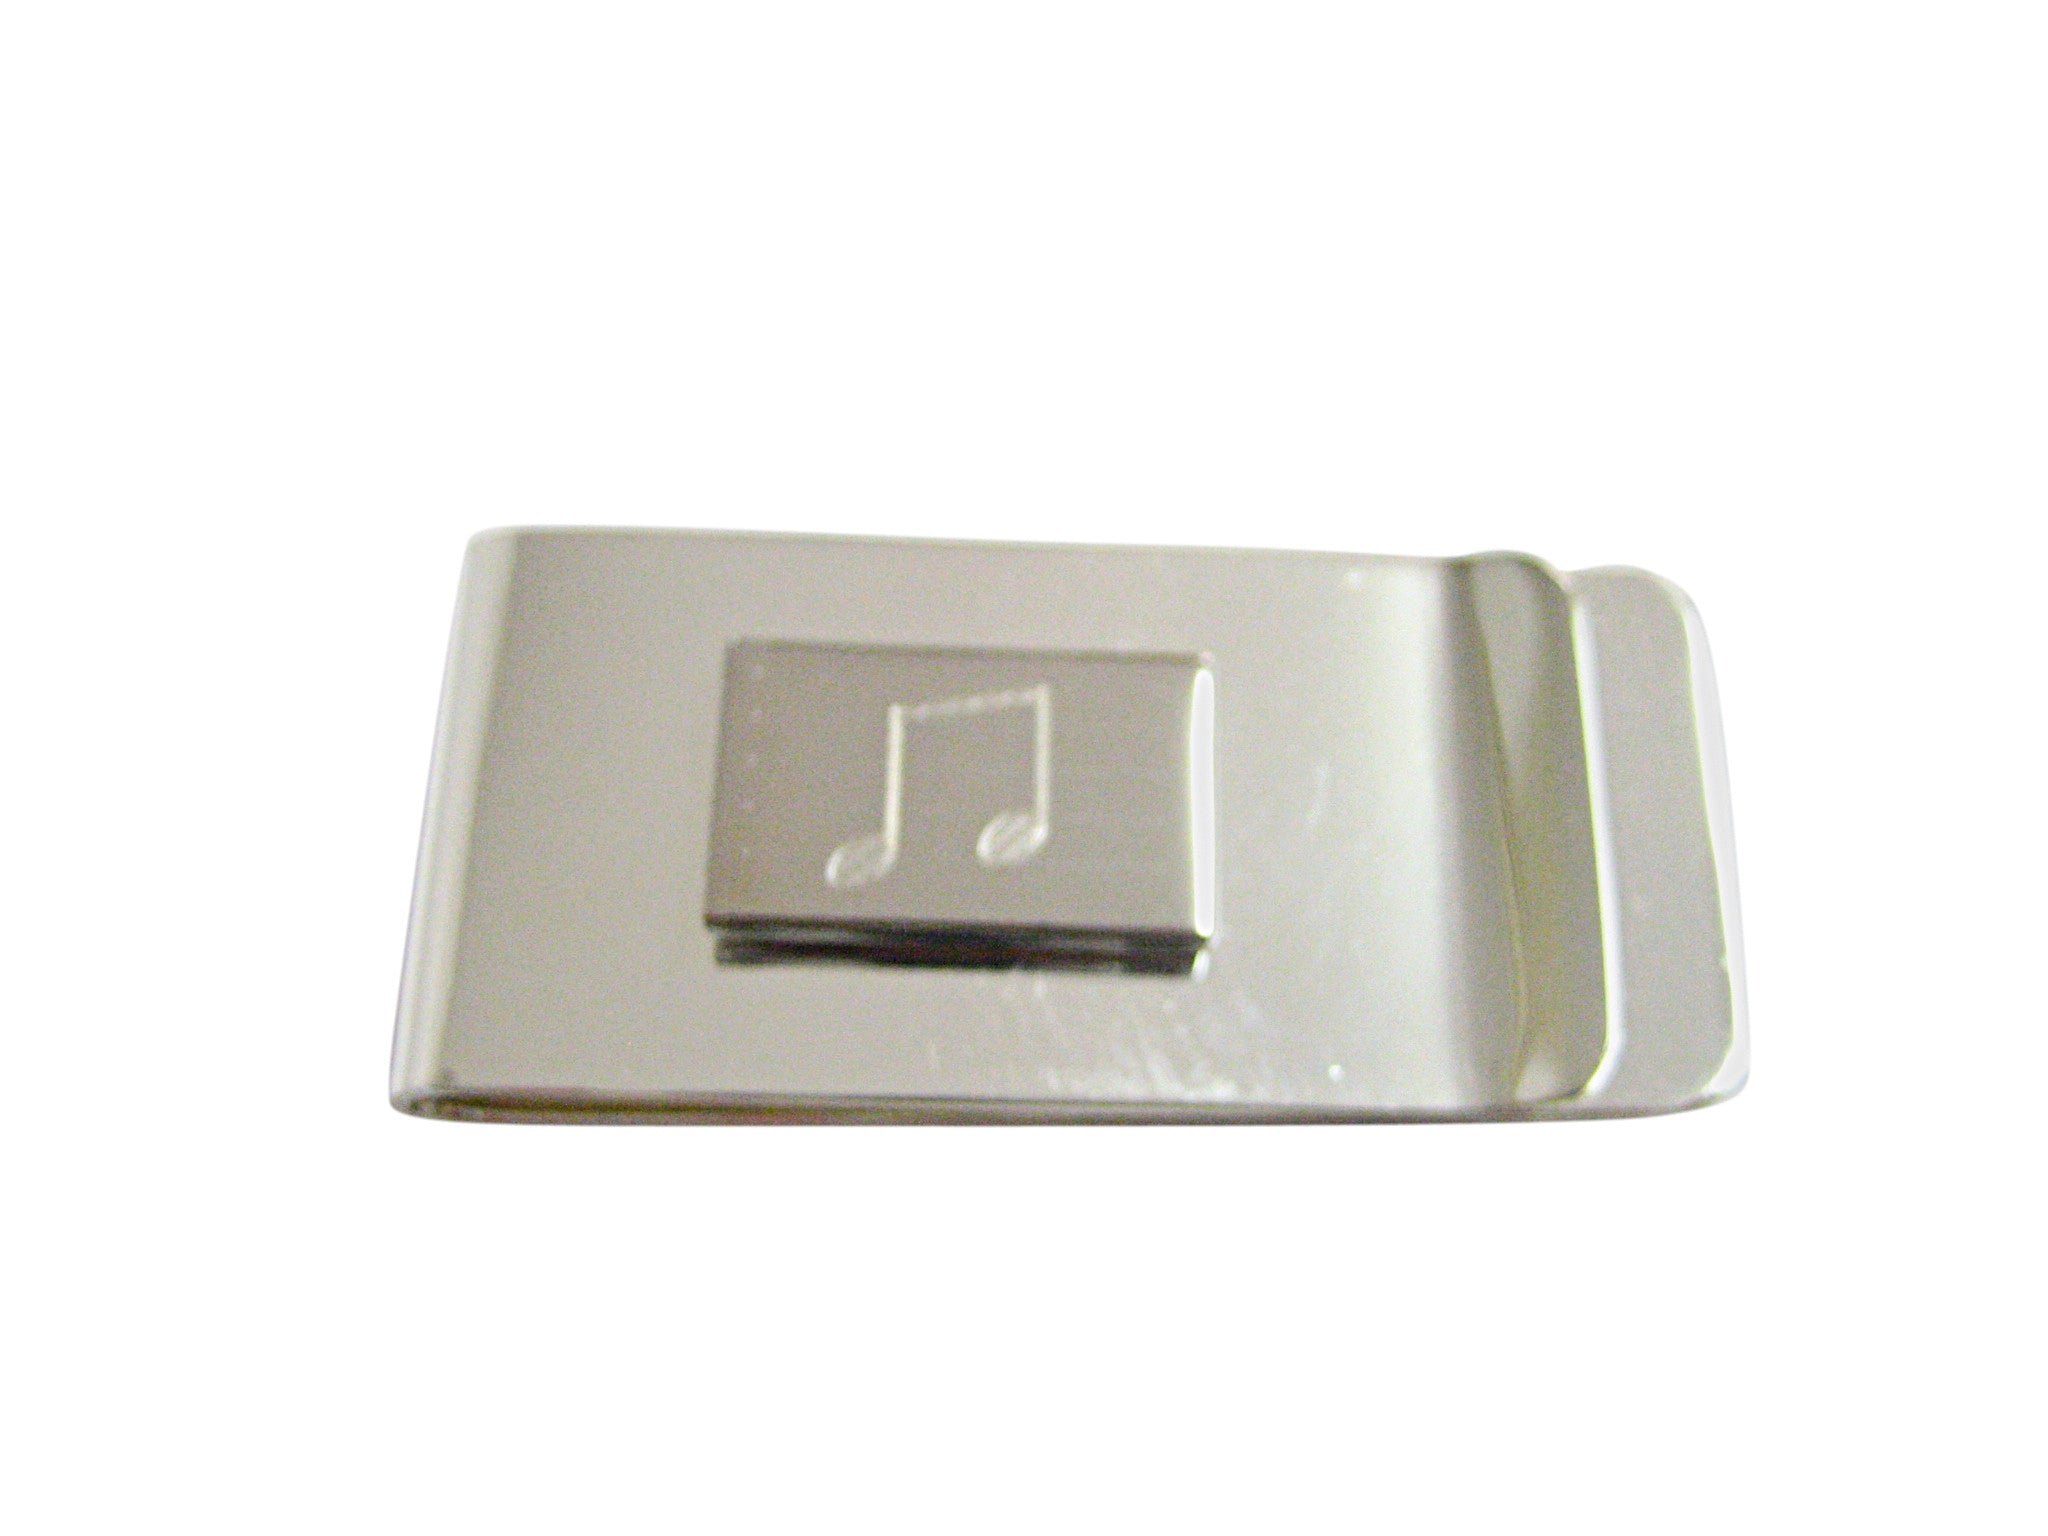 Etched Silver Toned Music Note Money Clip